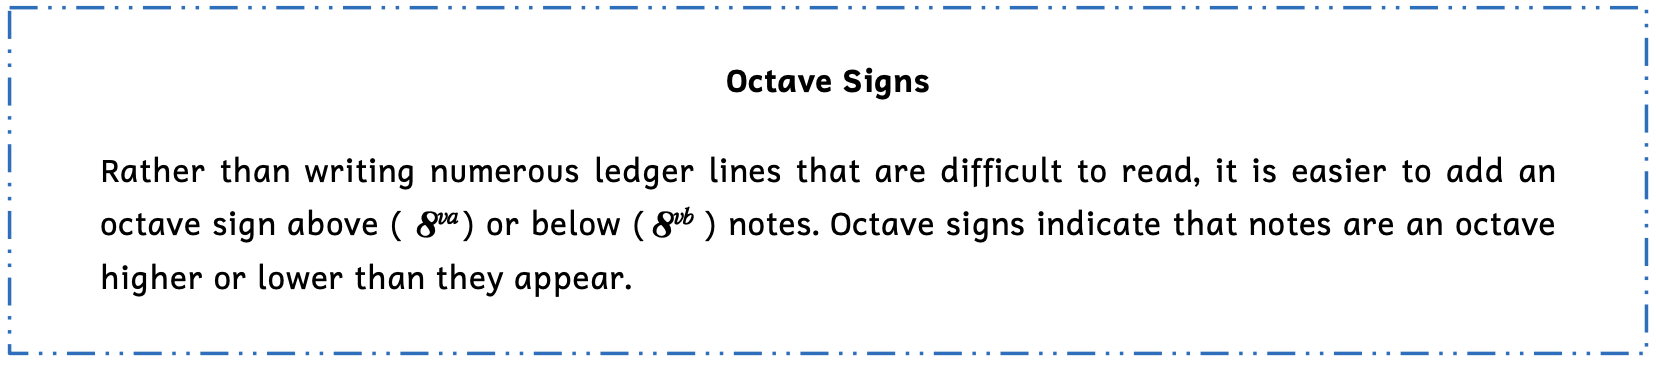 Summary box of octave signs. Rather than writing numerous ledger lines that are difficult to read, it is easier to add an octave sign above notes as 8, v, a, or below notes as 8, v, b. Octave signs indicate that notes are an octave higher or lower than they appear.